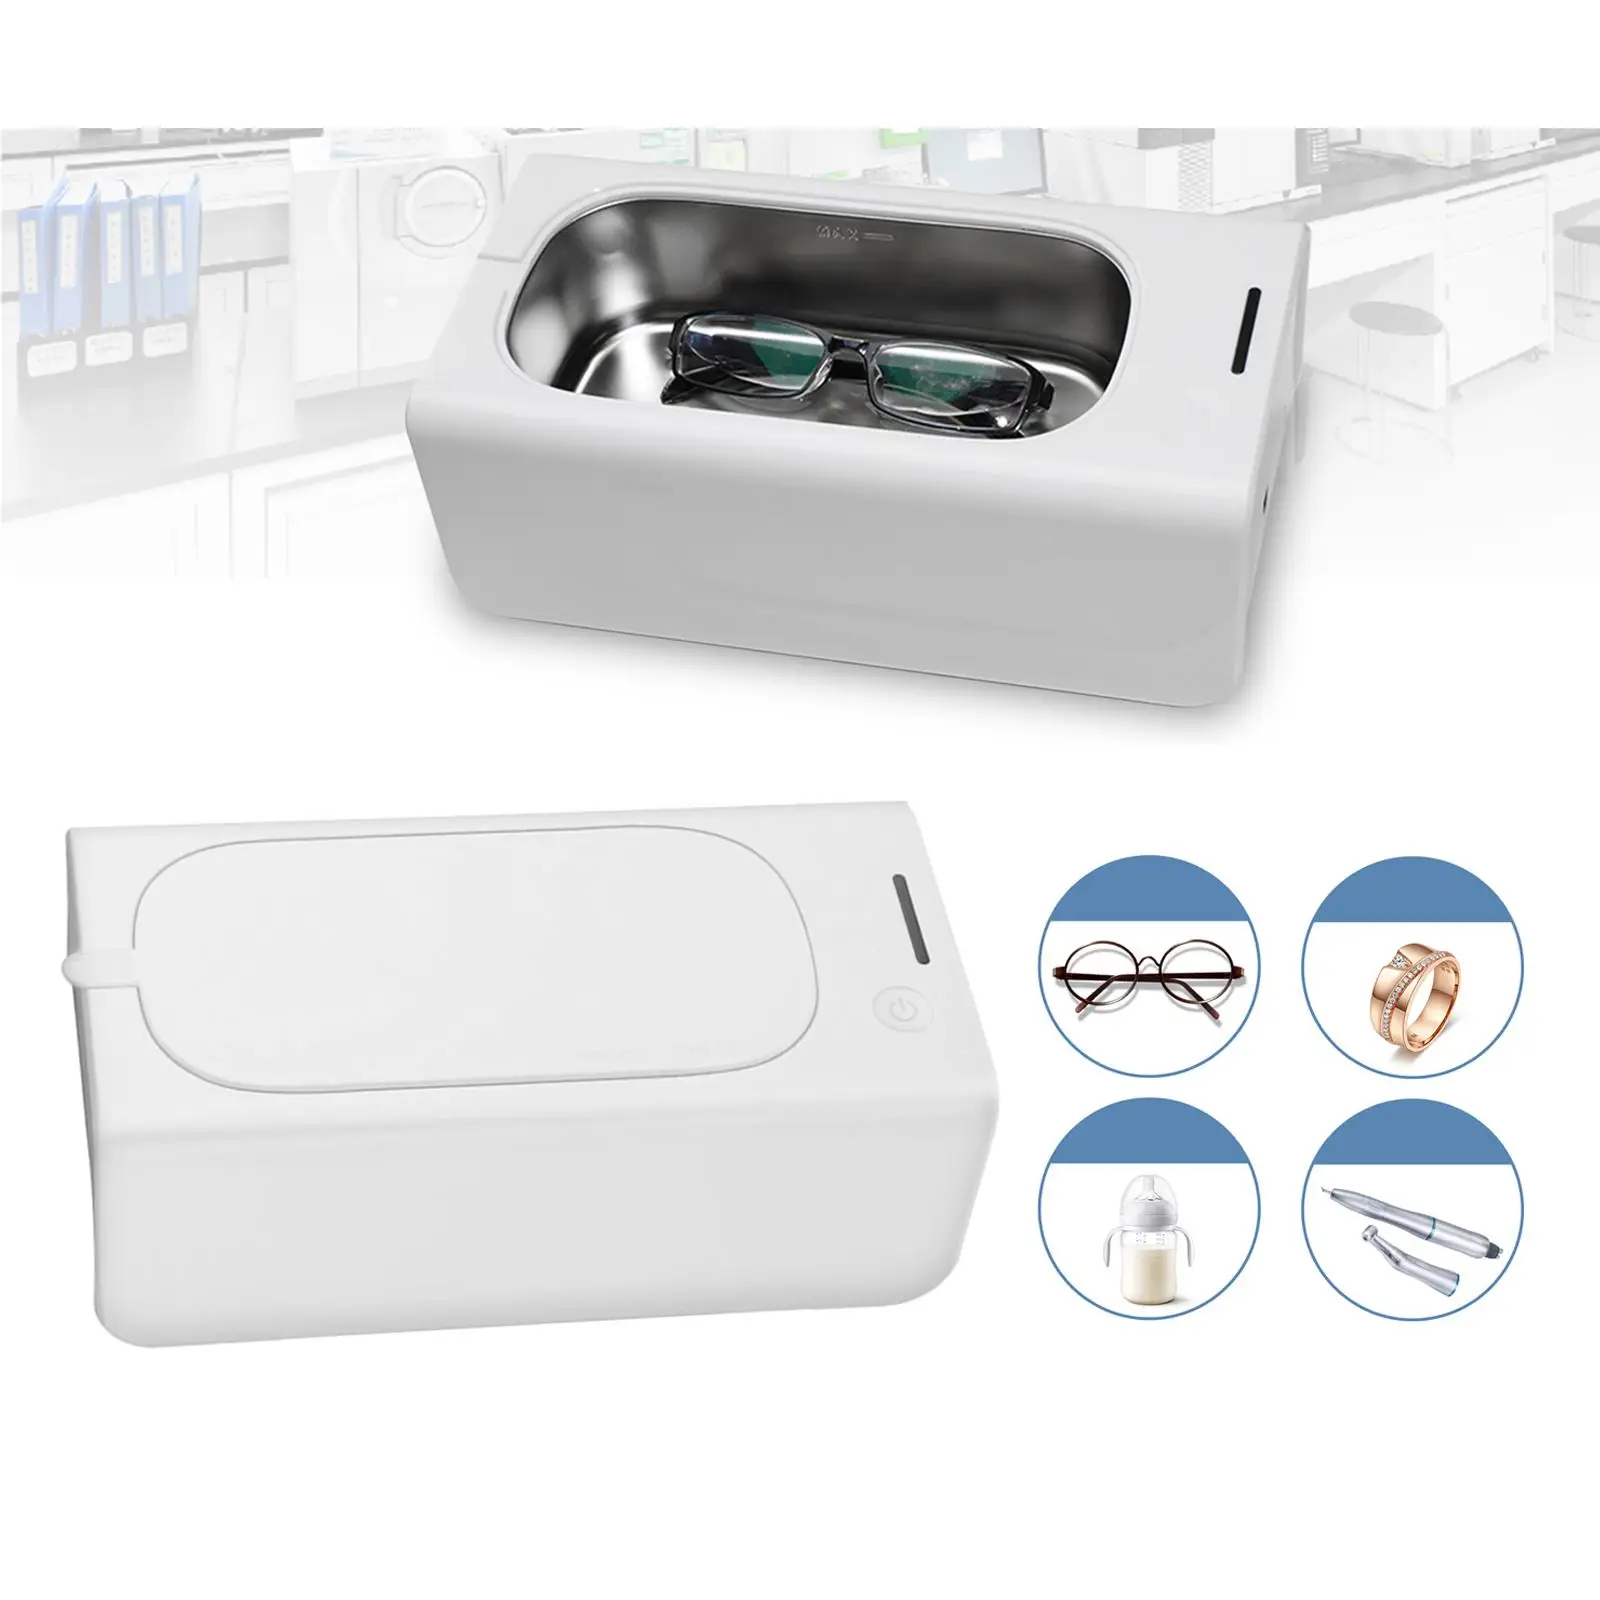 Electric Jewelry Cleaner Machine Ultrasonic Vibrating for Polishing Rings Necklace Dentures Professional Cleaning Tank Accessory